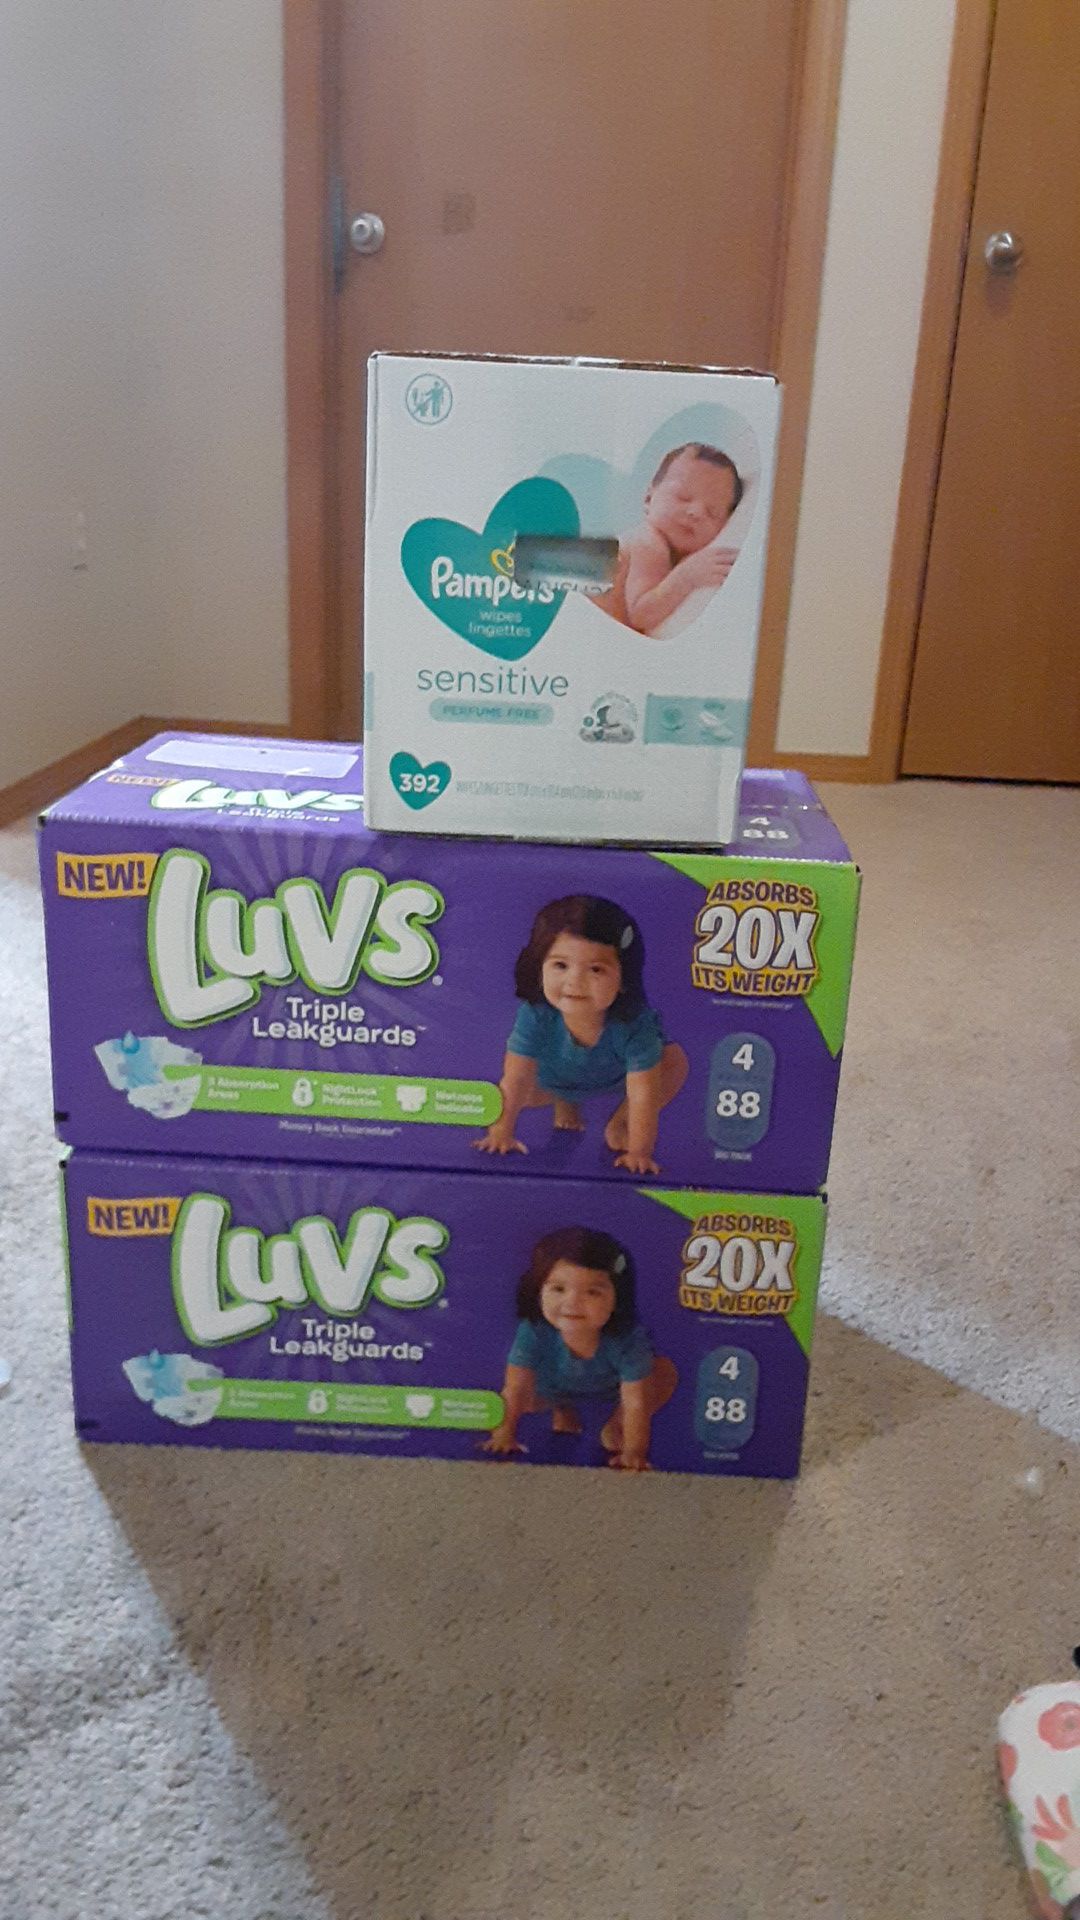 Luvs diapers and pampers wipes